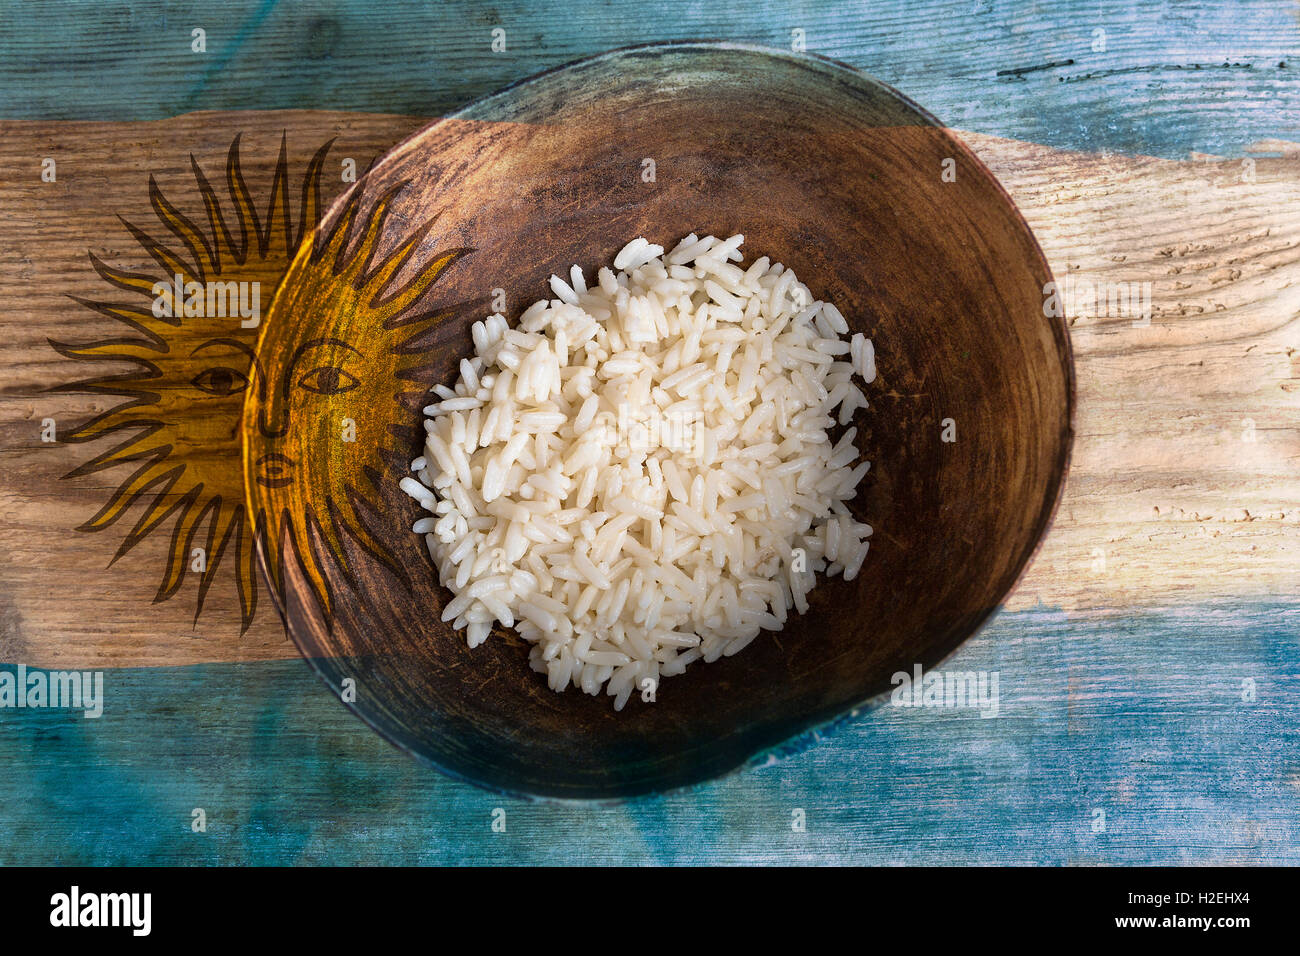 Poverty concept, bowl of rice with Argentine flag on wooden background Stock Photo